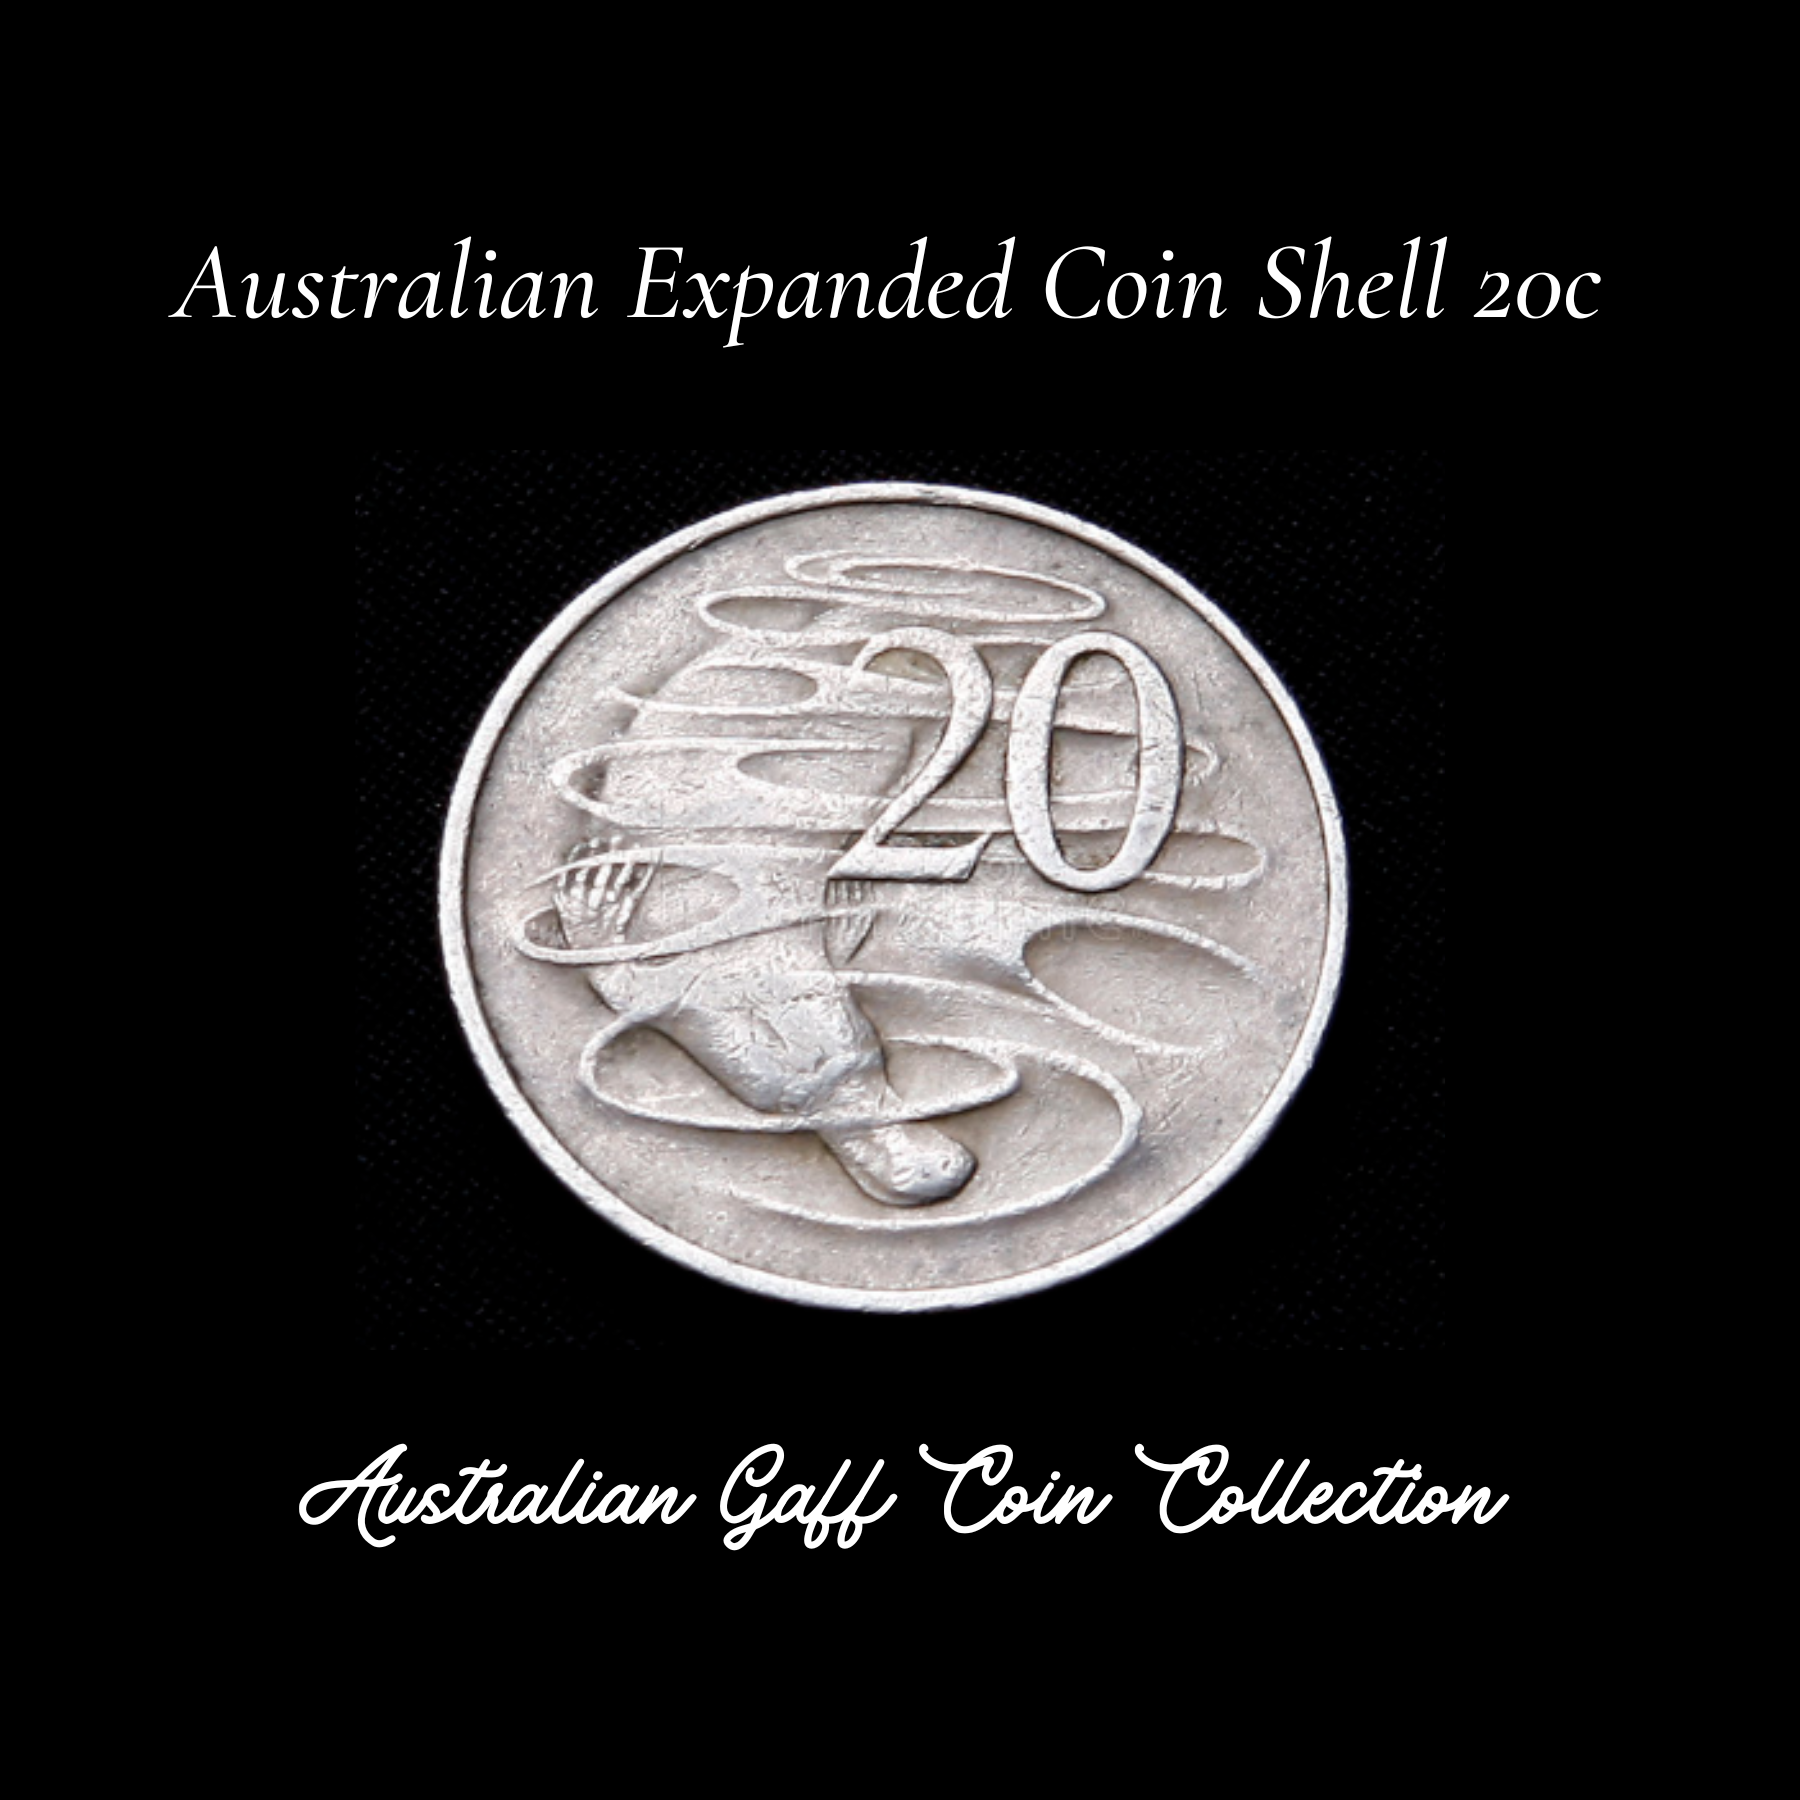 Expanded Coin Shell Australian 20c